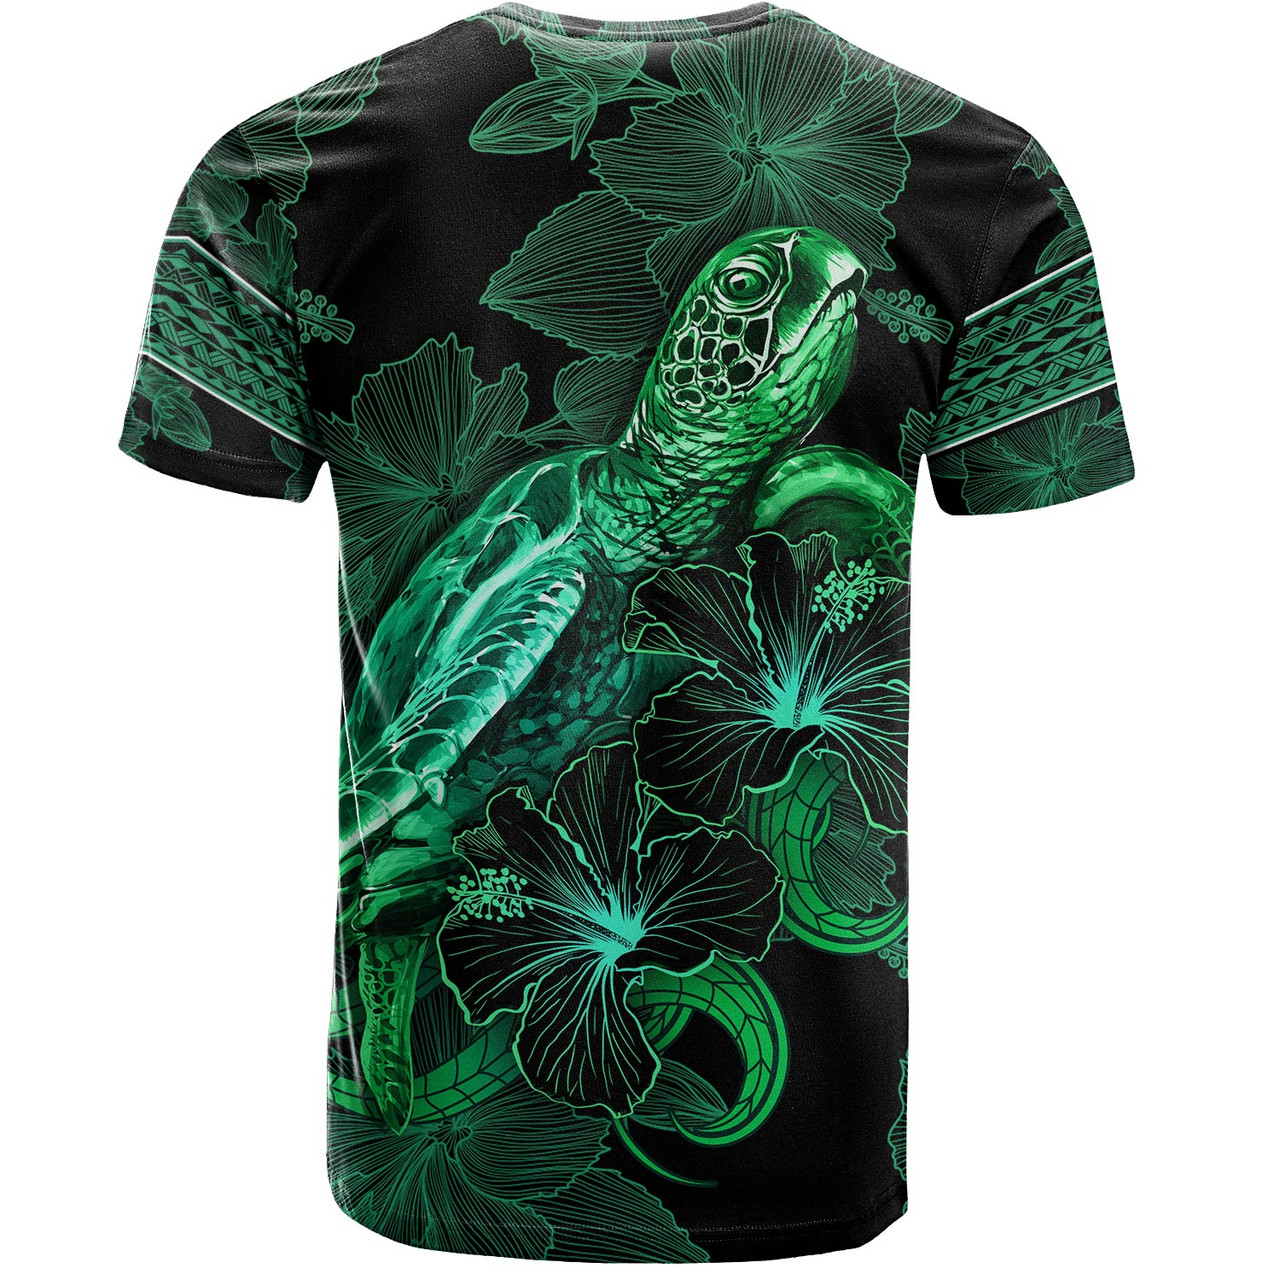 Tuvalu T-Shirt  Sea Turtle With Blooming Hibiscus Flowers Tribal Green